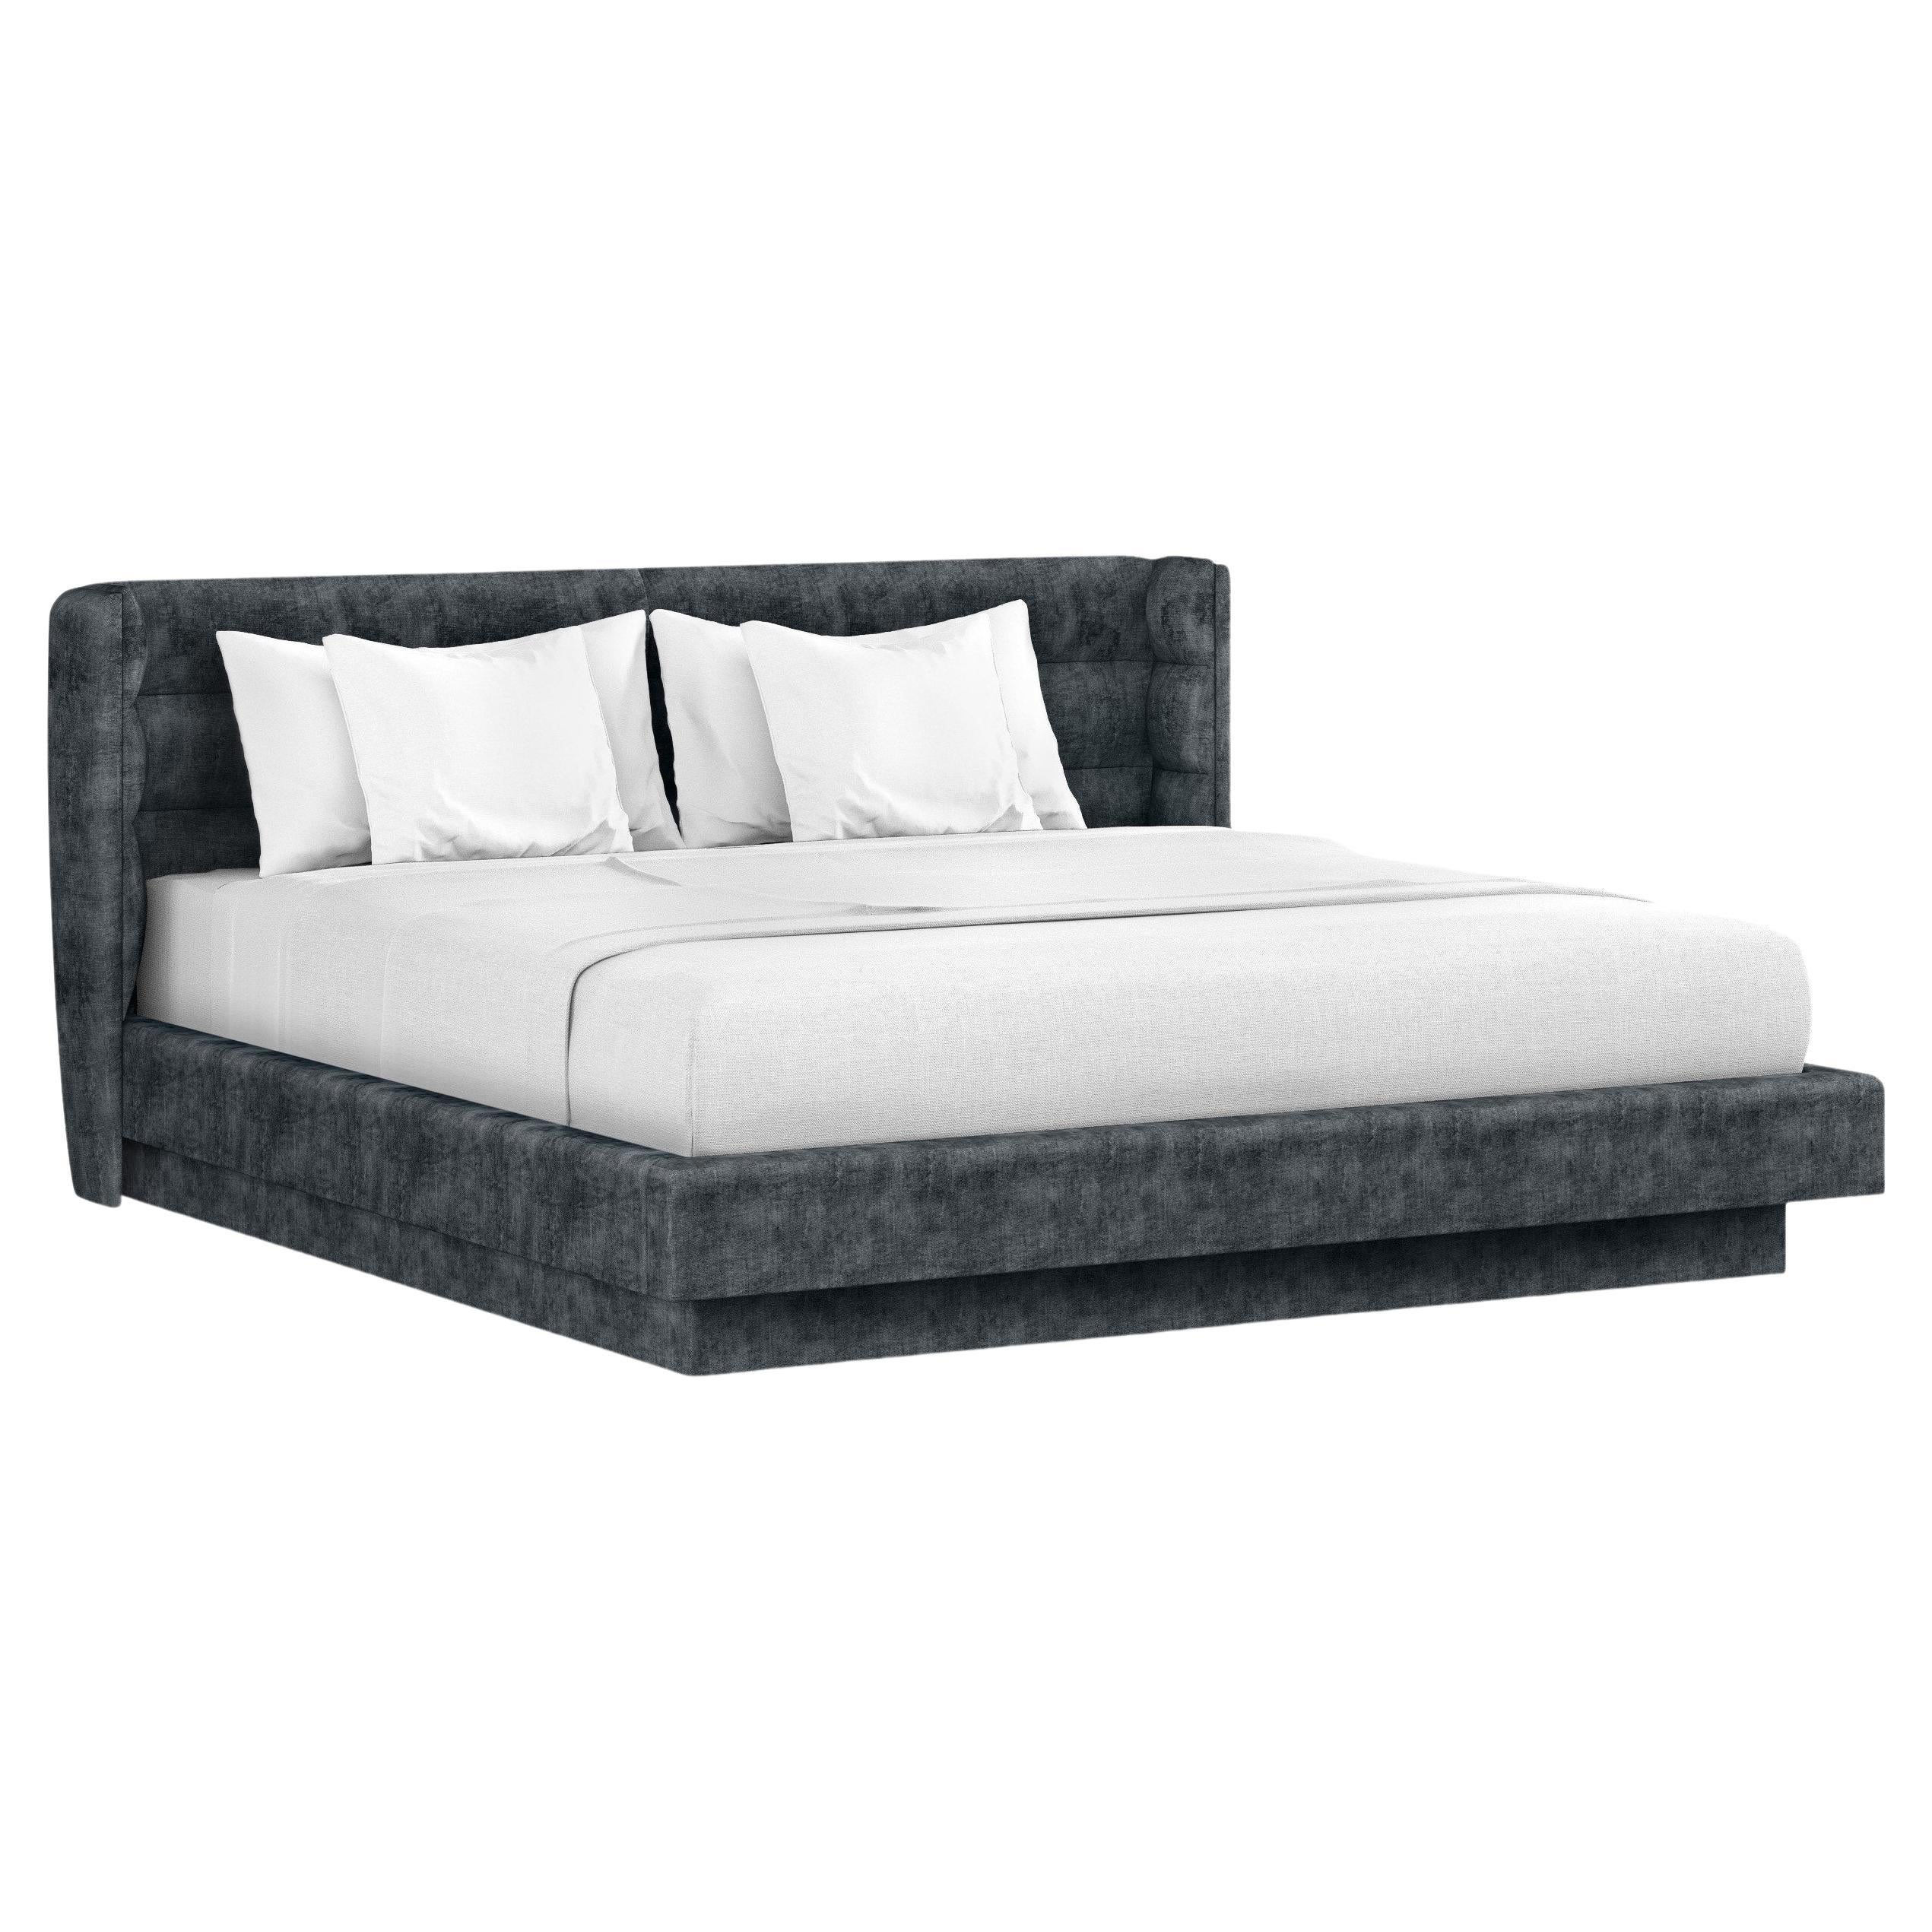 Cliff Young Fully Upholstered Zarra King Size Bed with Channeled Headboard